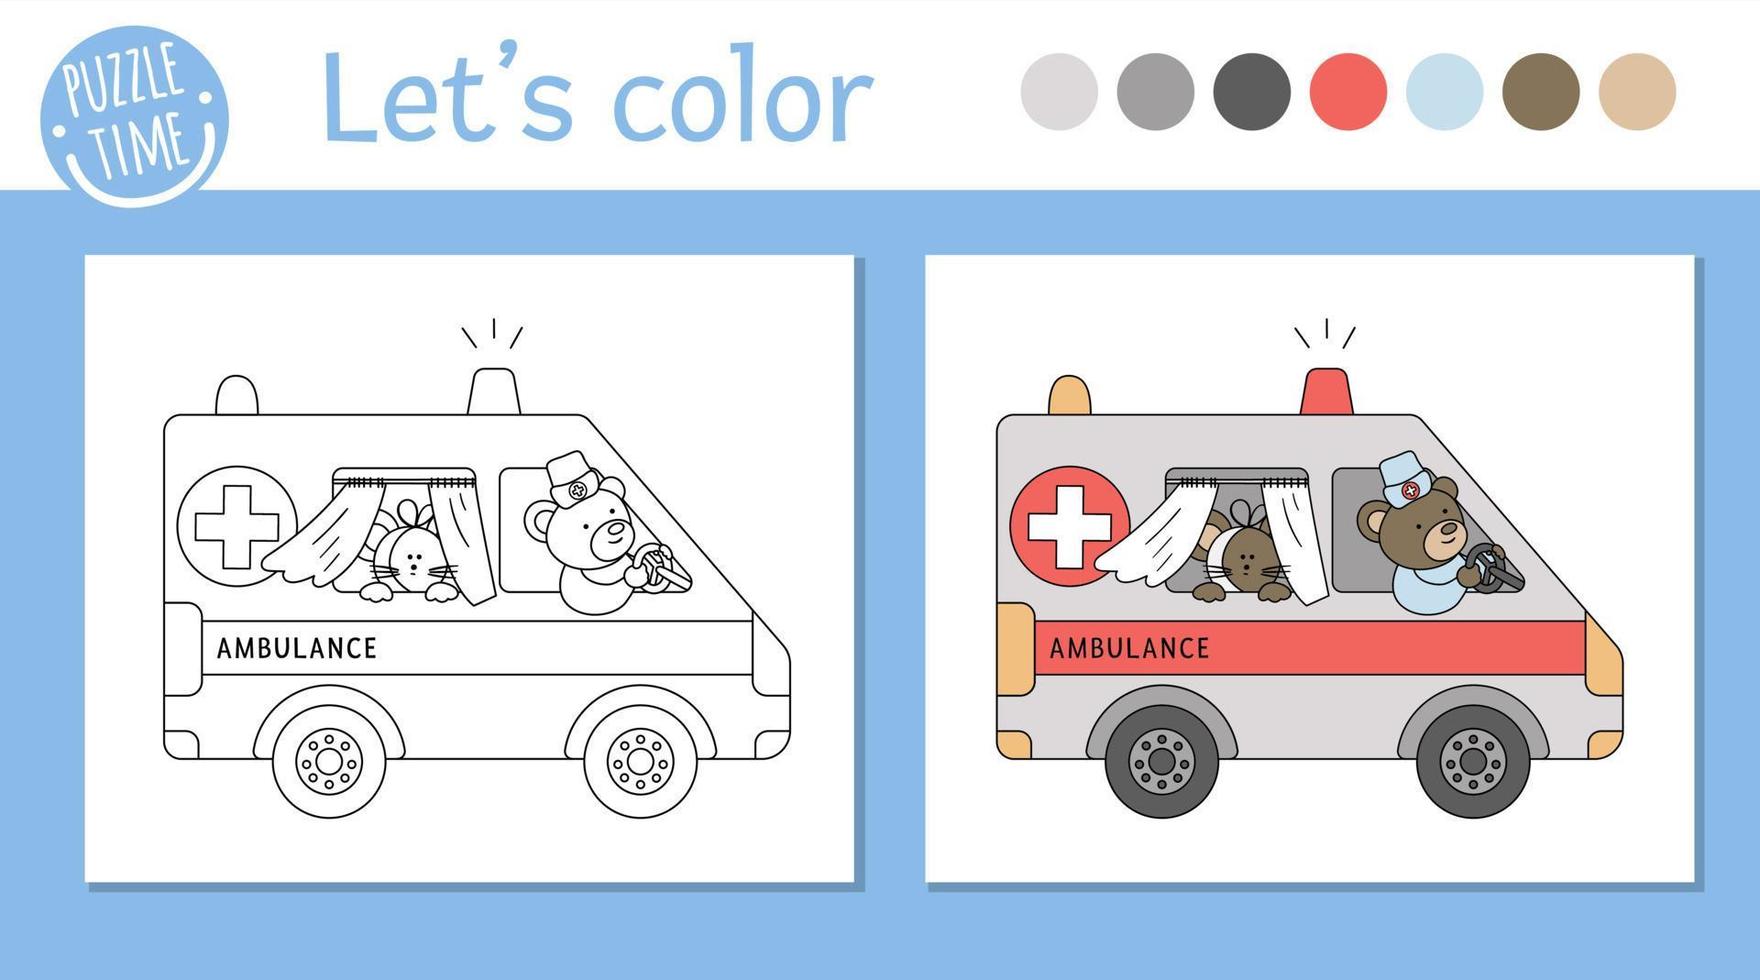 Medical coloring page for children. Vector outline ambulance with cute animals inside. Bear doctor driving emergency car with ill mouse. Funny special medical transport color book for kids.